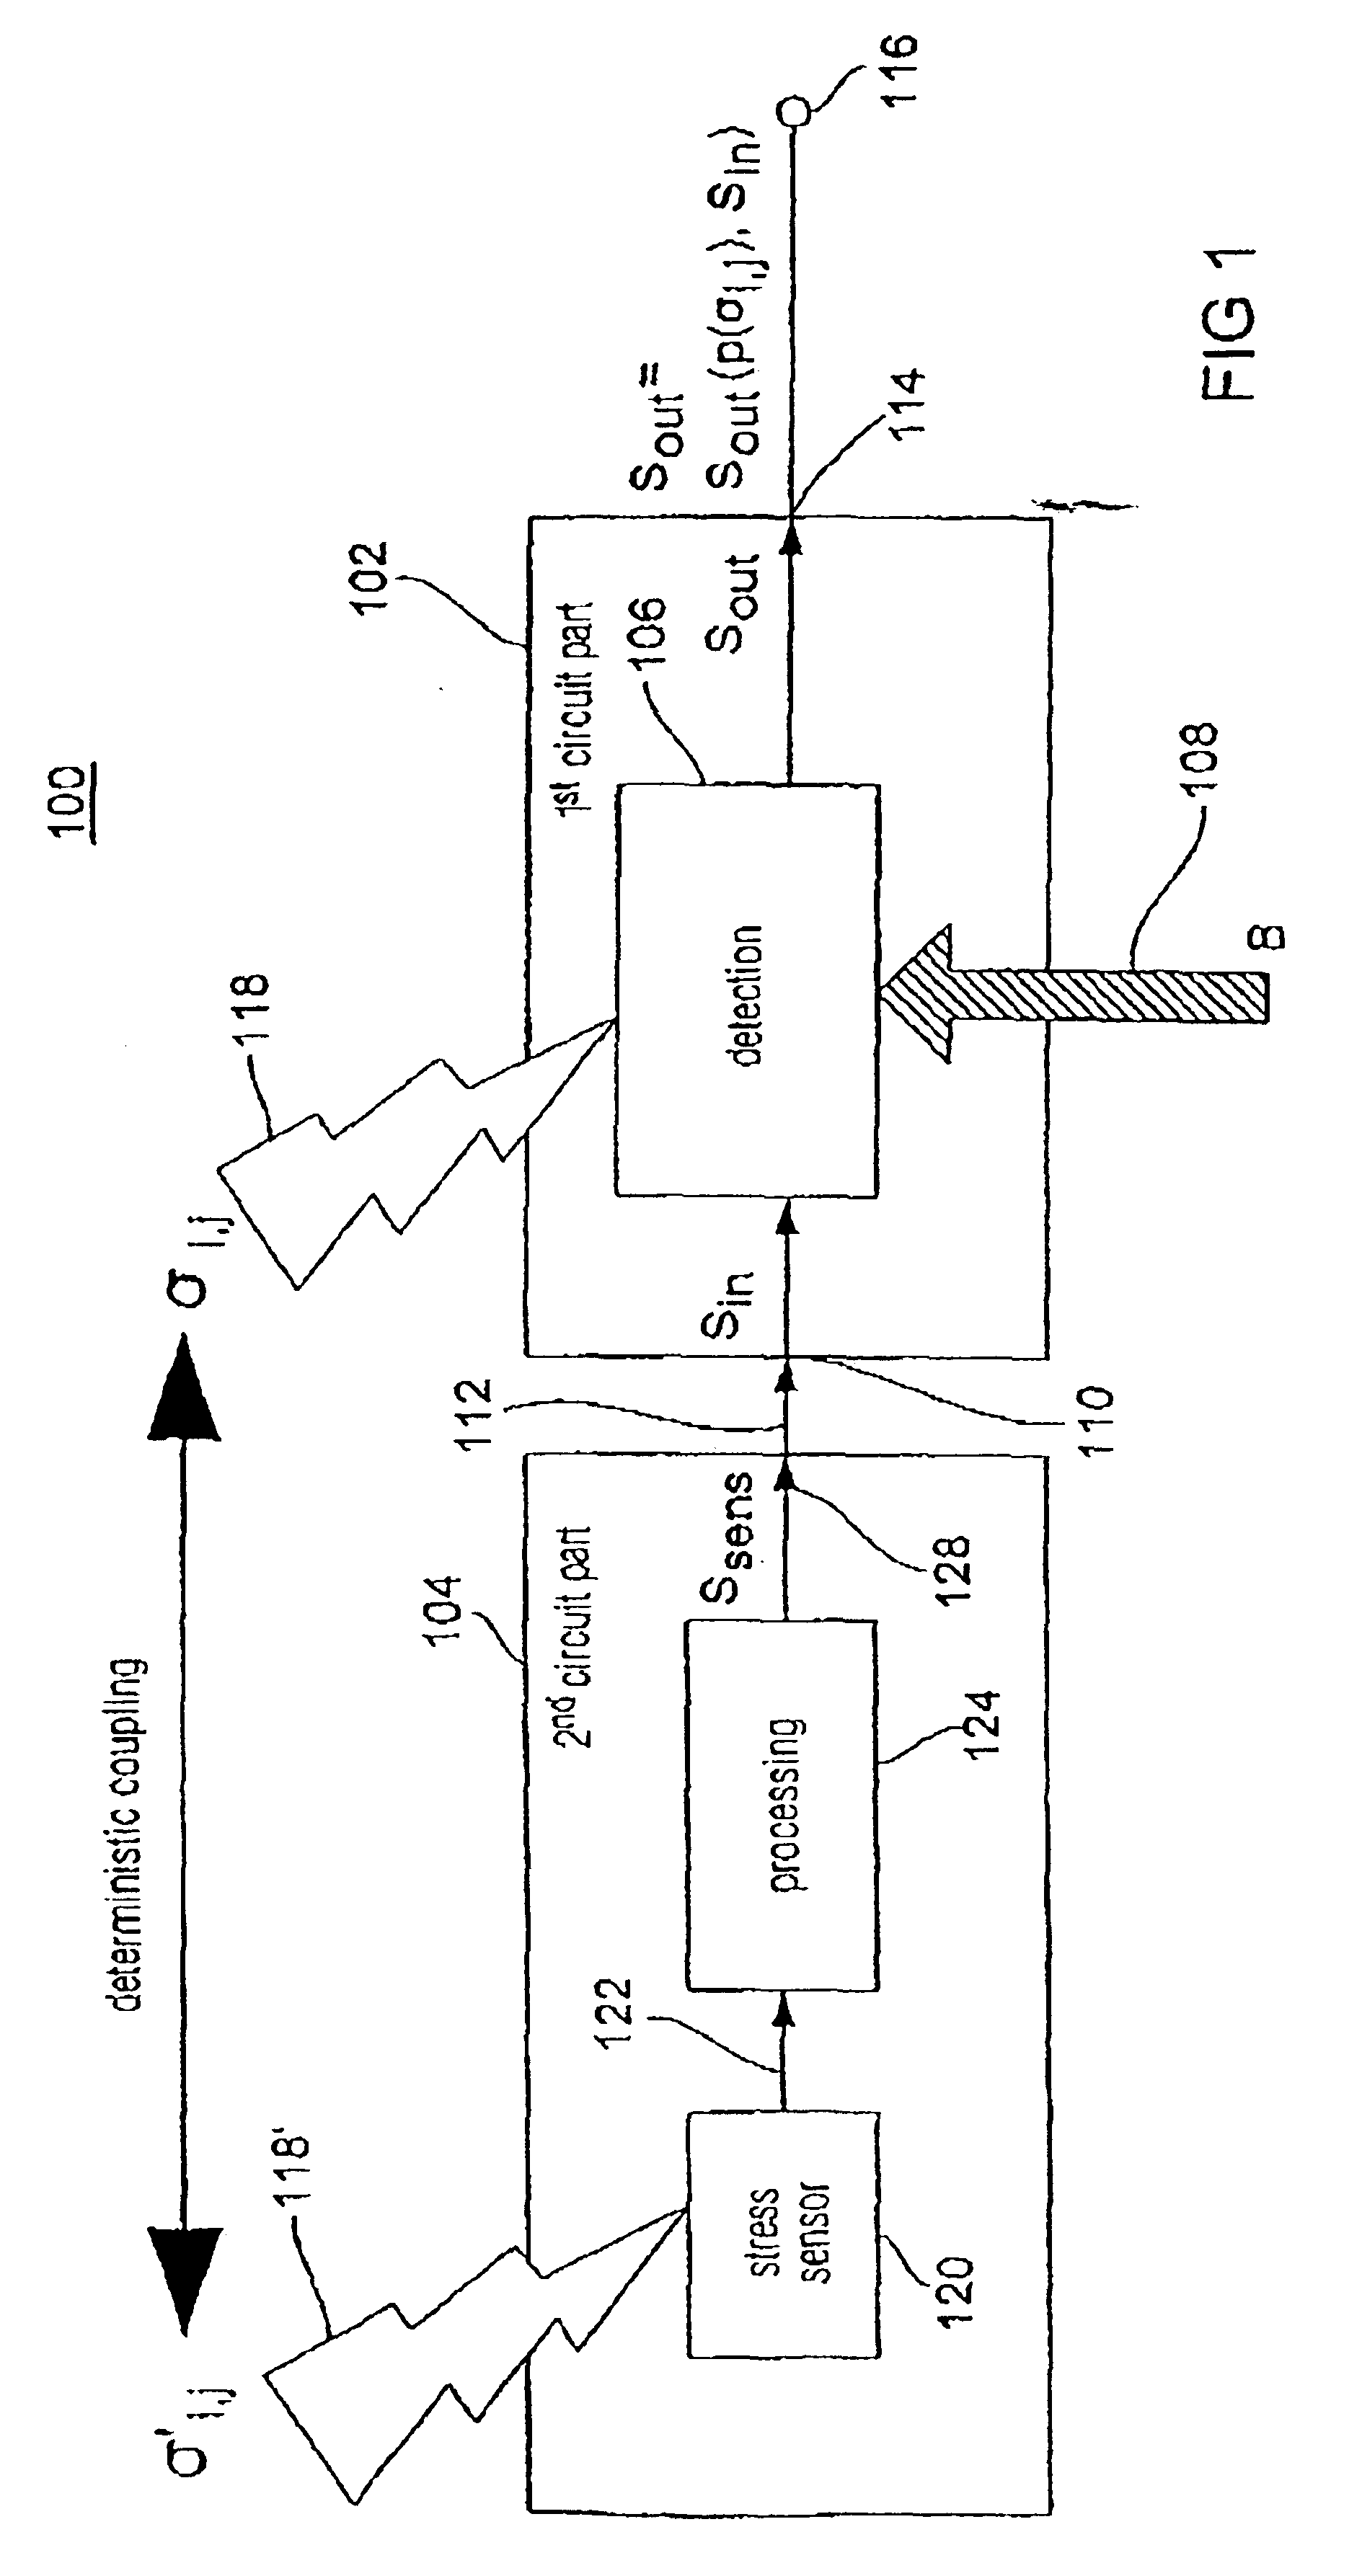 Concept for compensating the influences of external disturbing quantities on physical functional parameters of integrated circuits